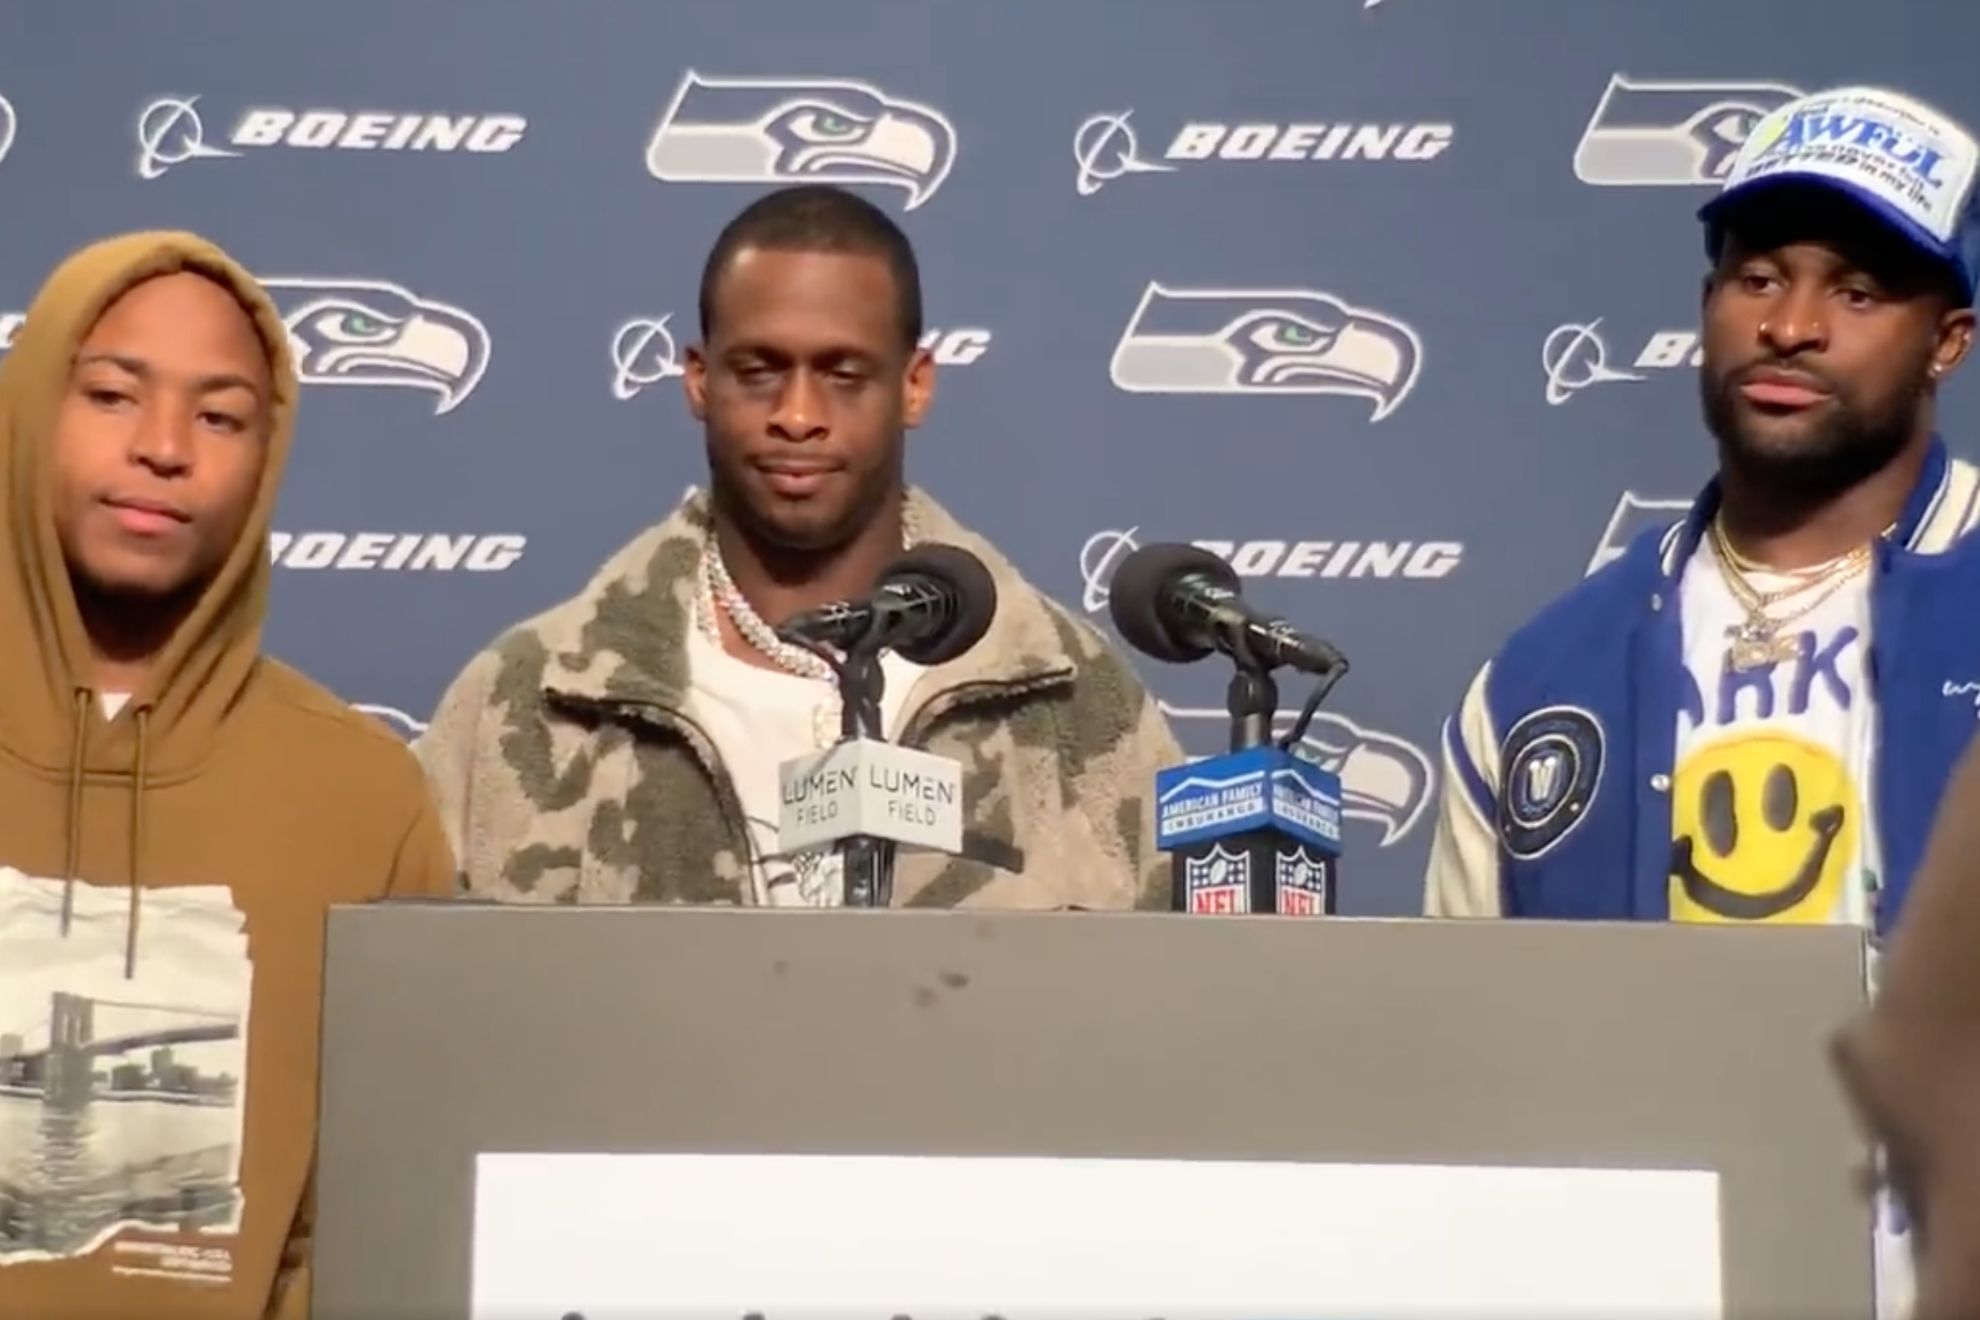 Tyler Lockett, Geno Smith and DK Metcalf address the media after their win over the Giants in a special joint press conference.